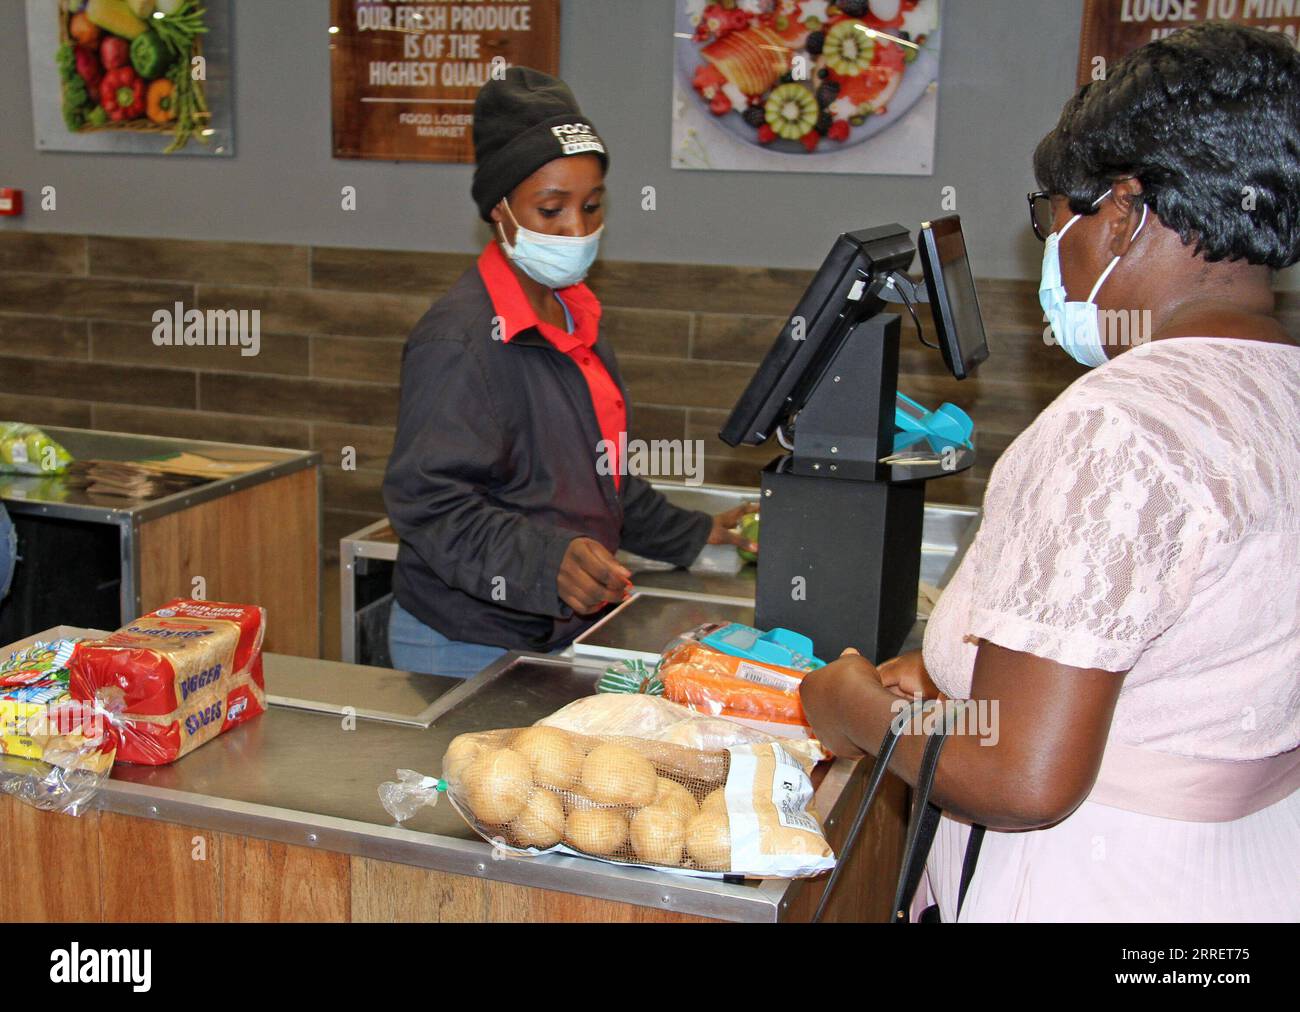 220315 -- WINDHOEK, March 15, 2022 -- A woman pays for the goods she purchased in a supermarket in Windhoek, Namibia, March 15, 2022. Namibia s annual inflation rate in February 2022 continued on an upward trend, increasing by 4.5 per cent compared to 2.7 per cent recorded in February 2021, the country s statistics agency NSA said Tuesday. Photo by /Xinhua NAMIBIA-WINDHOEK-INFLATION MusaxCxKaseke PUBLICATIONxNOTxINxCHN Stock Photo